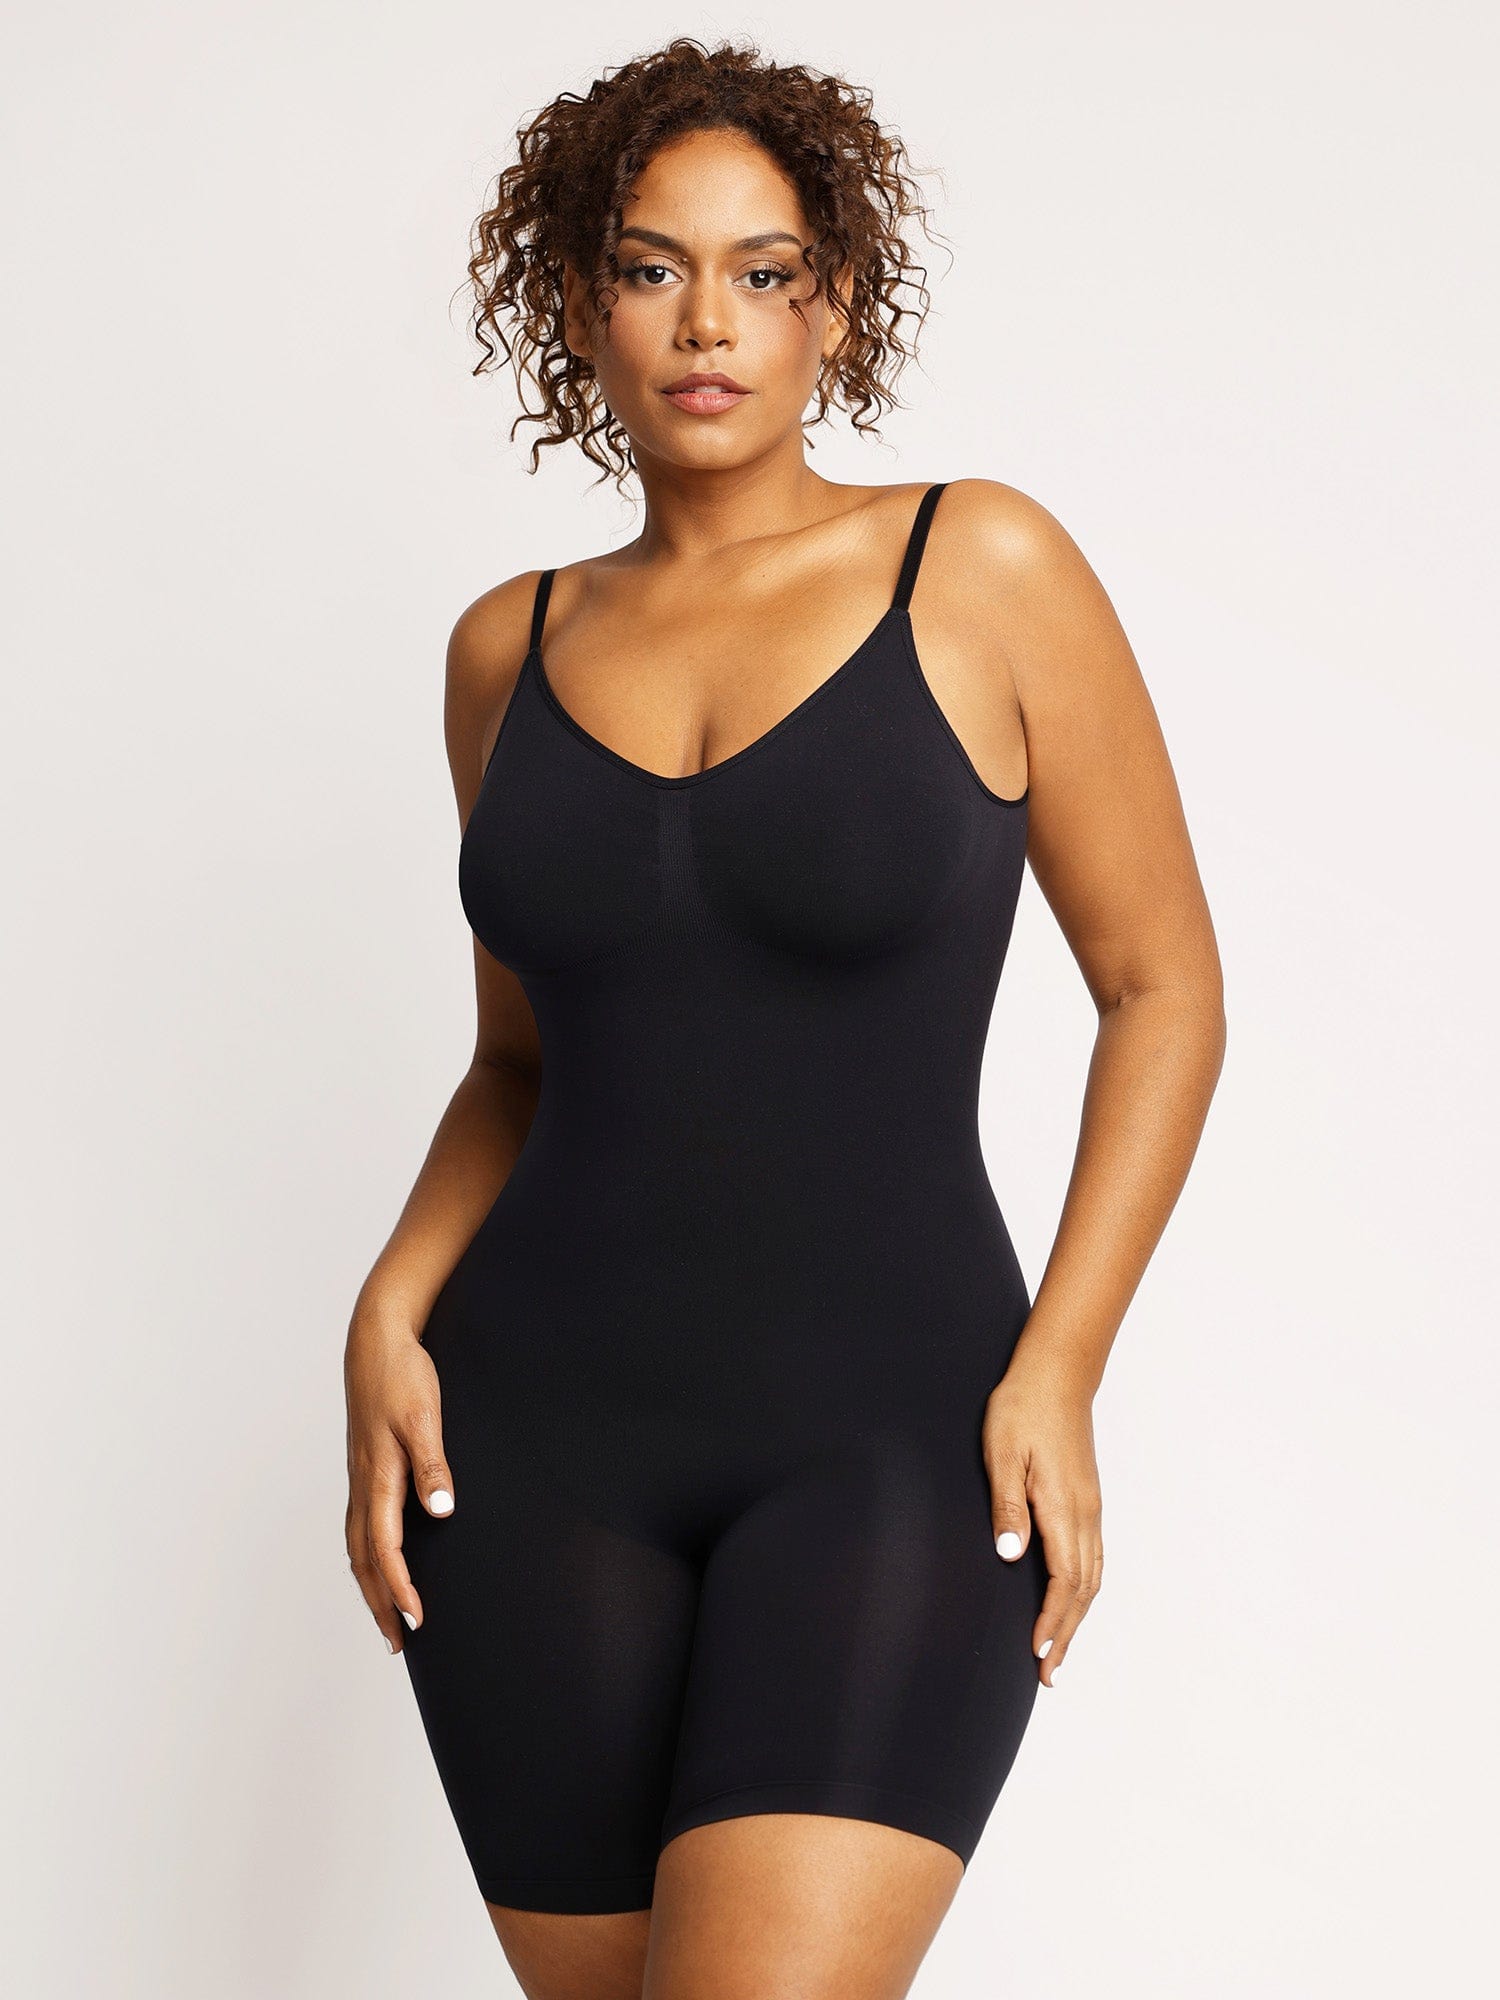 Mid-Thigh Arm Control Short Sleeve Bodysuit. Body Shaper, Tommy Control  Slimmer with Arm Shapewear by Your Contour (Black, XL)